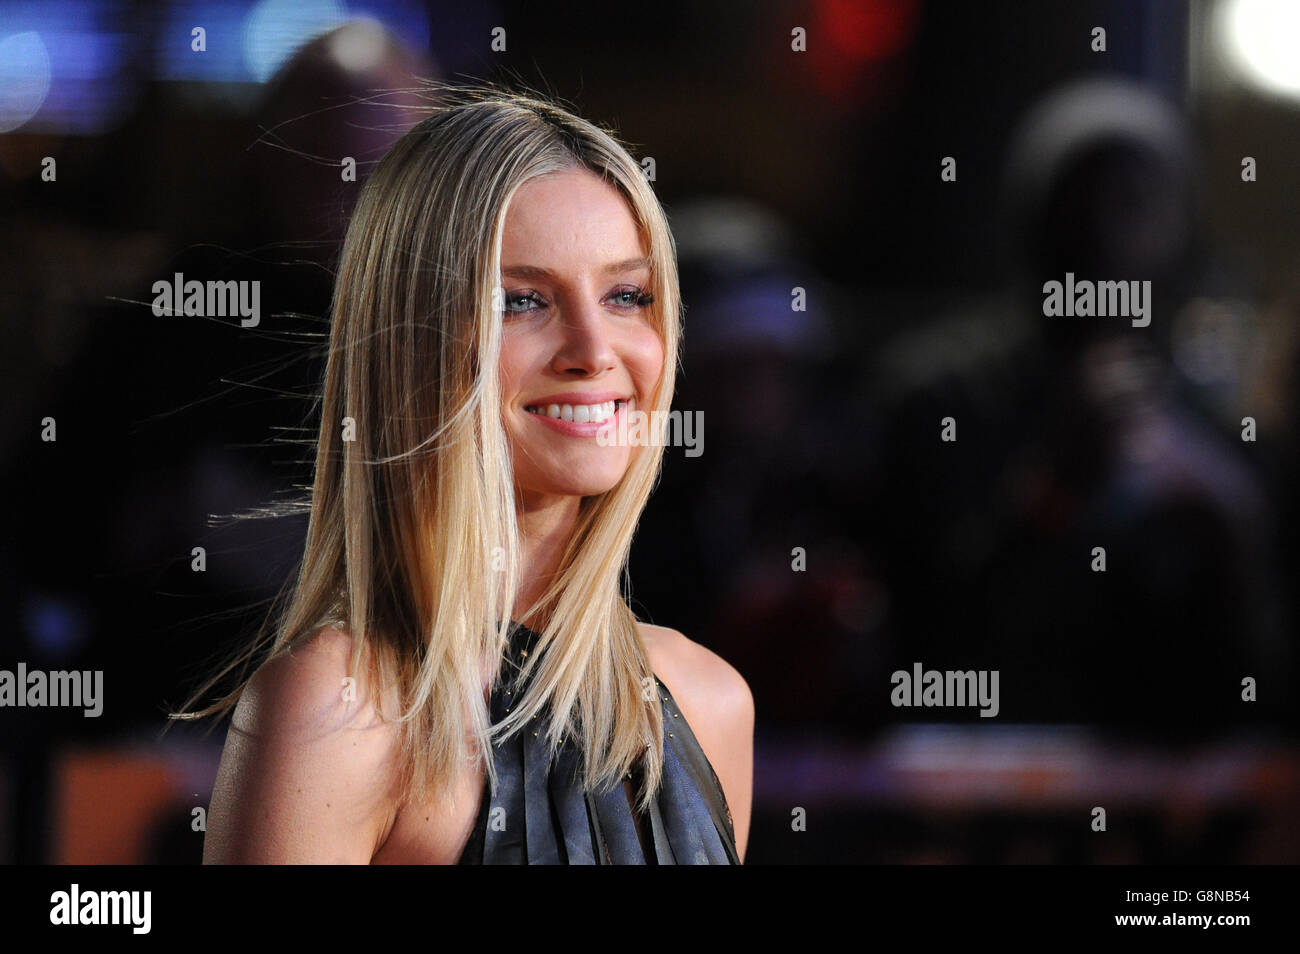 Annabelle Wallis attending The World Premiere of Grimsby, at the Odeon Leicester Square, London. PRESS ASSOCIATION Photo. Picture date: Monday February 22, 2016. See PA Story SHOWBIZ Grimsby. Photo credit should read: Dominic Lipinski/PA Wire Stock Photo